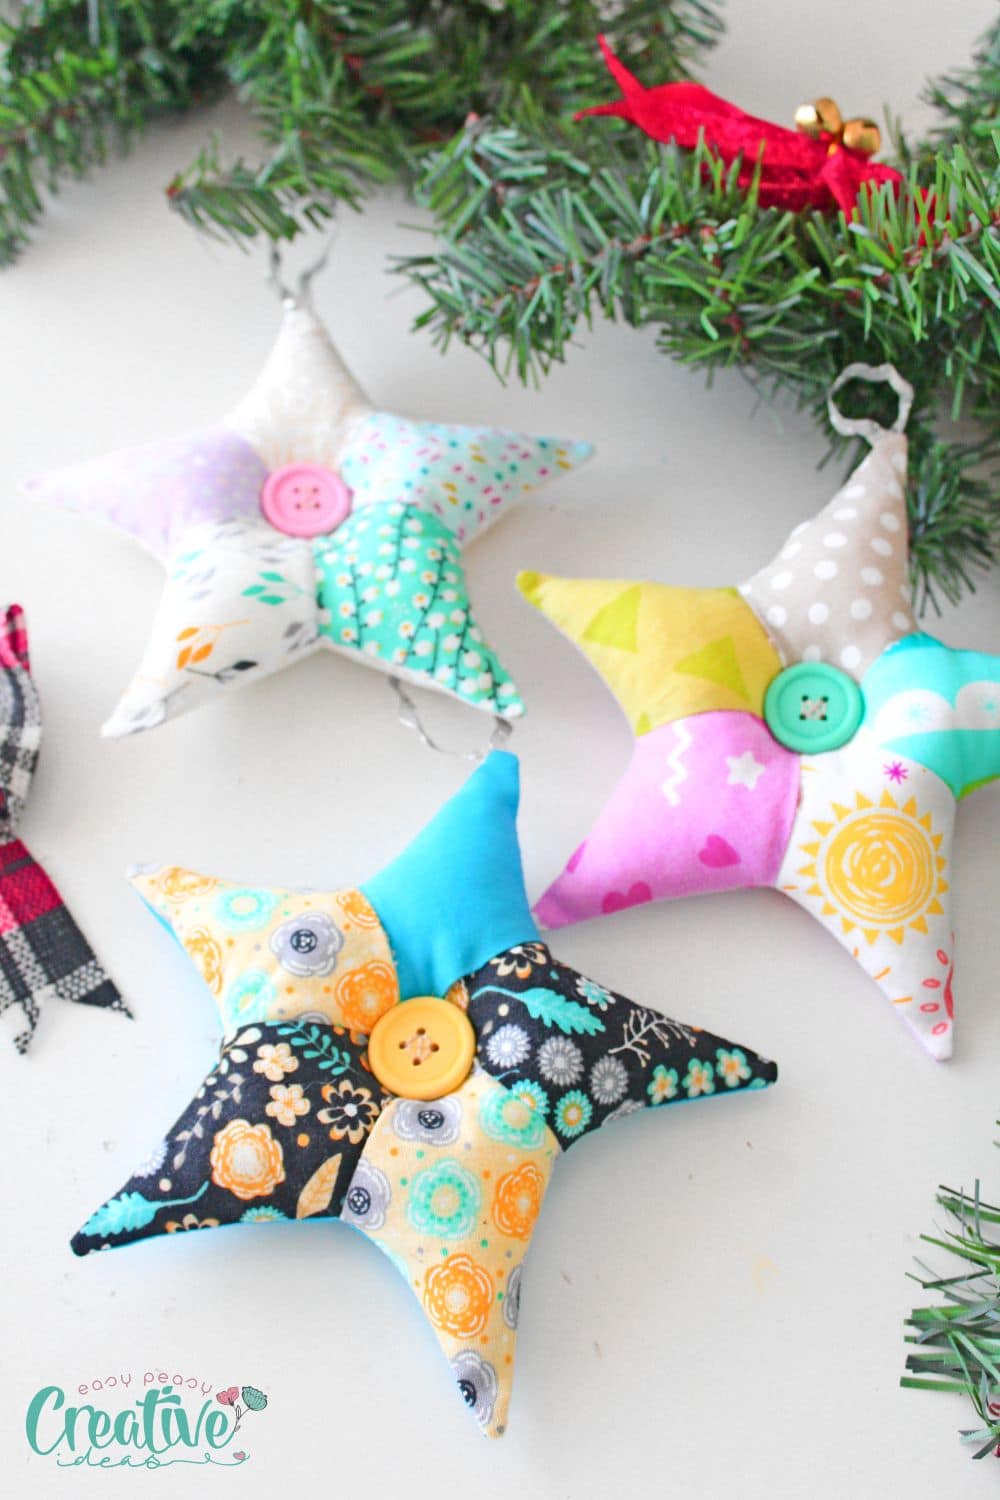 Handsewn patchwork stars for Christmas